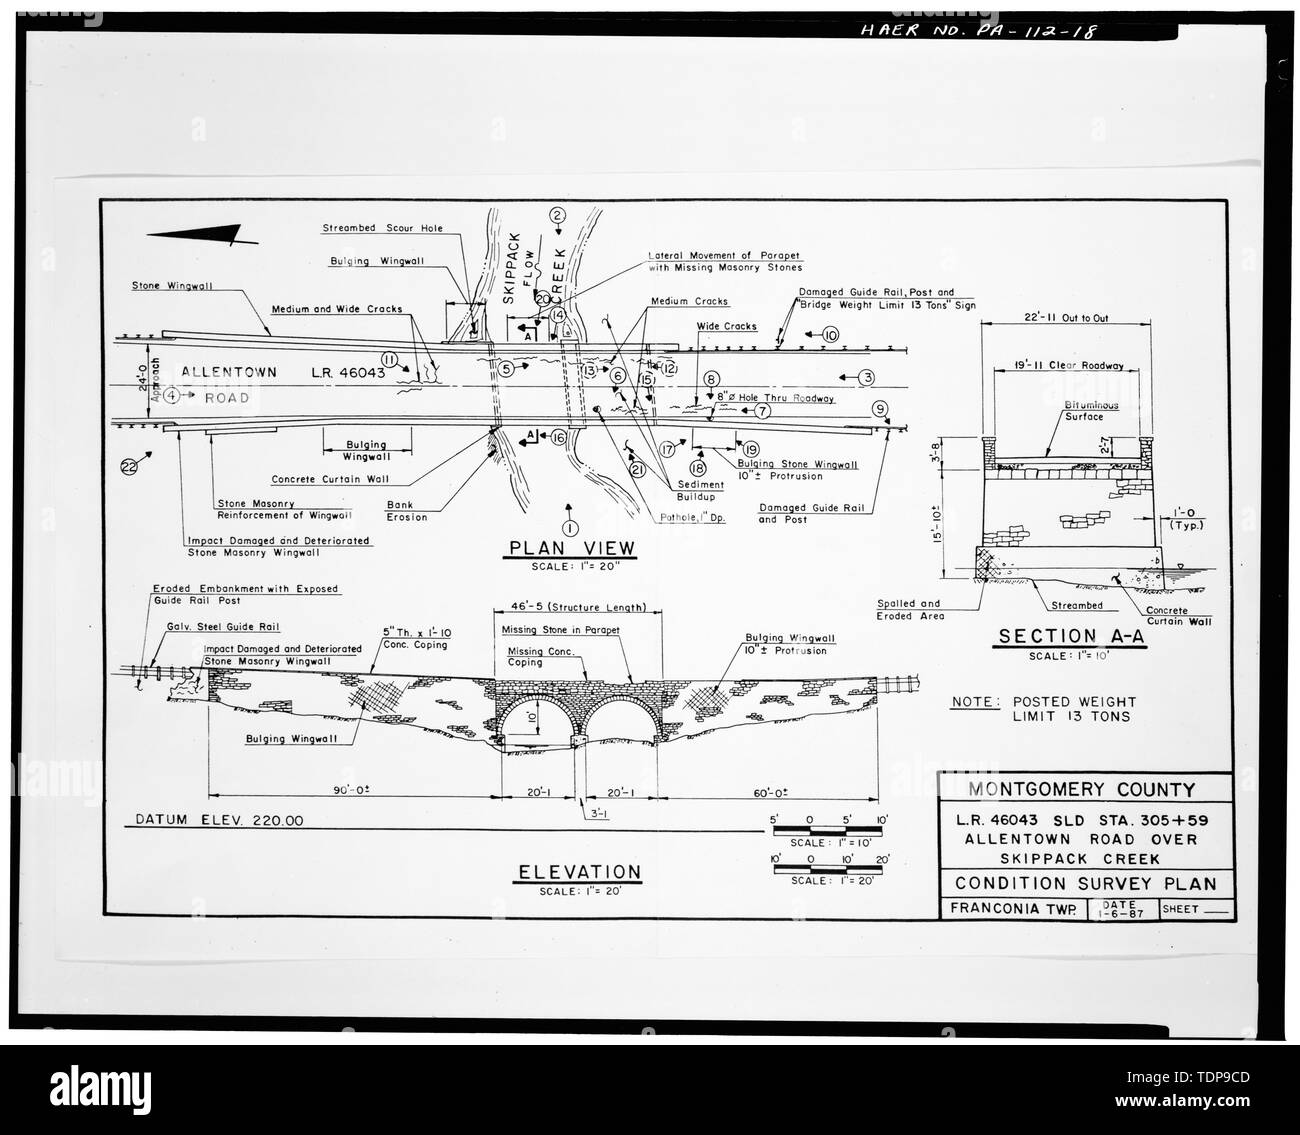 Photocopy of bridge drawing, 1987 (original in possession of Pickering, Corts, and Sumerson, Inc.) ELEVATION, PLAN, AND SECTION - Allentown Road Bridge, Spanning Skippack Creek on Allentown Road, Franconia, Montgomery County, PA; Cresson, James; Just, William; Pennsylvania Department of Transportation; Moore, William; Pennemen, Robert; Houpt, Ezekiel; Houpt, Isaiah B; Hagey, Henry; Spero, Paula A, C, contractor; Shelley, Robert C, photographer Stock Photo